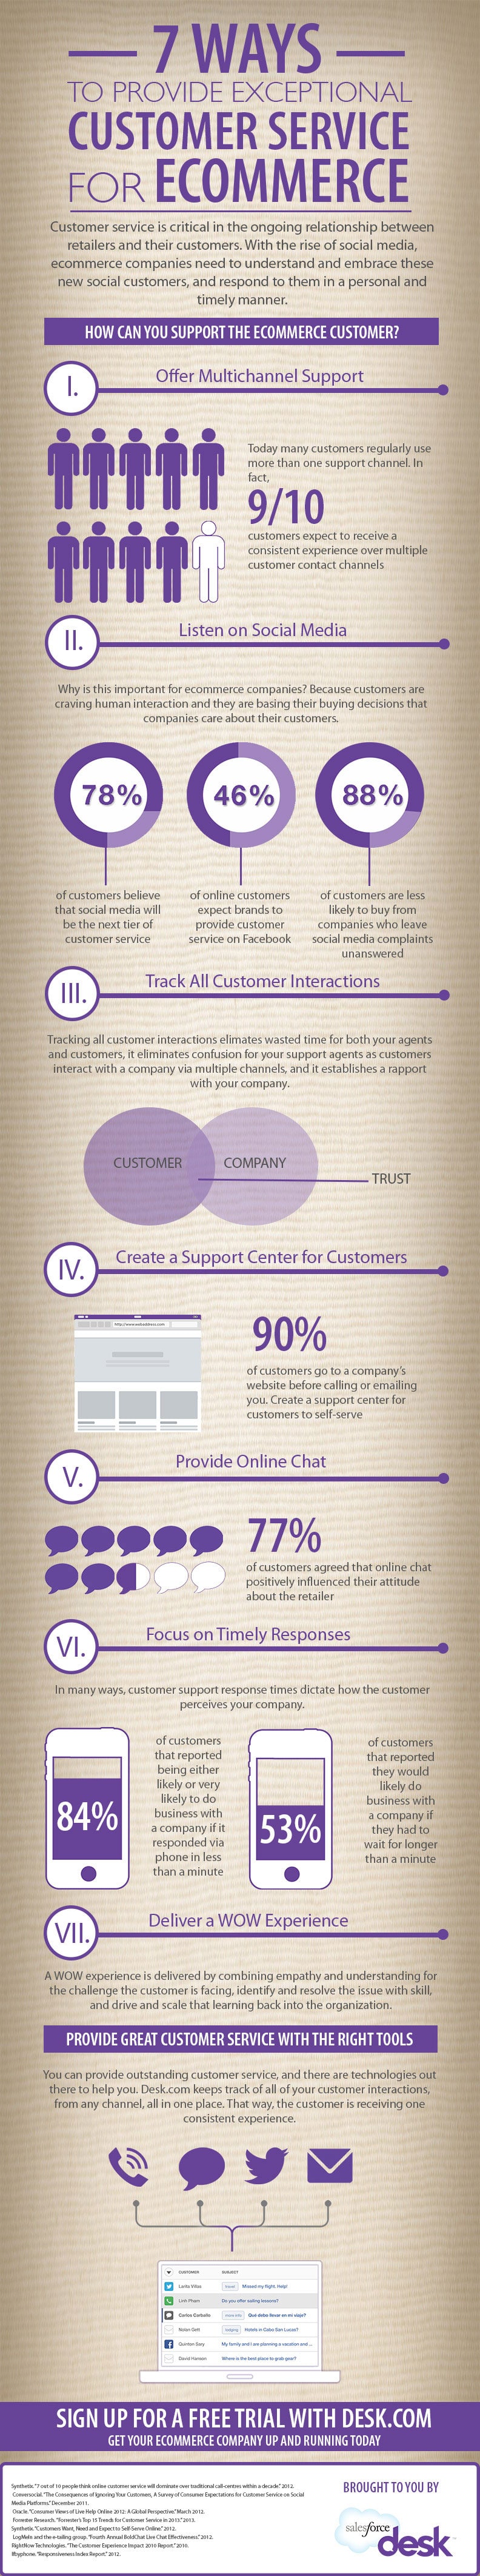 ecommerce-online-customer-service-infographic